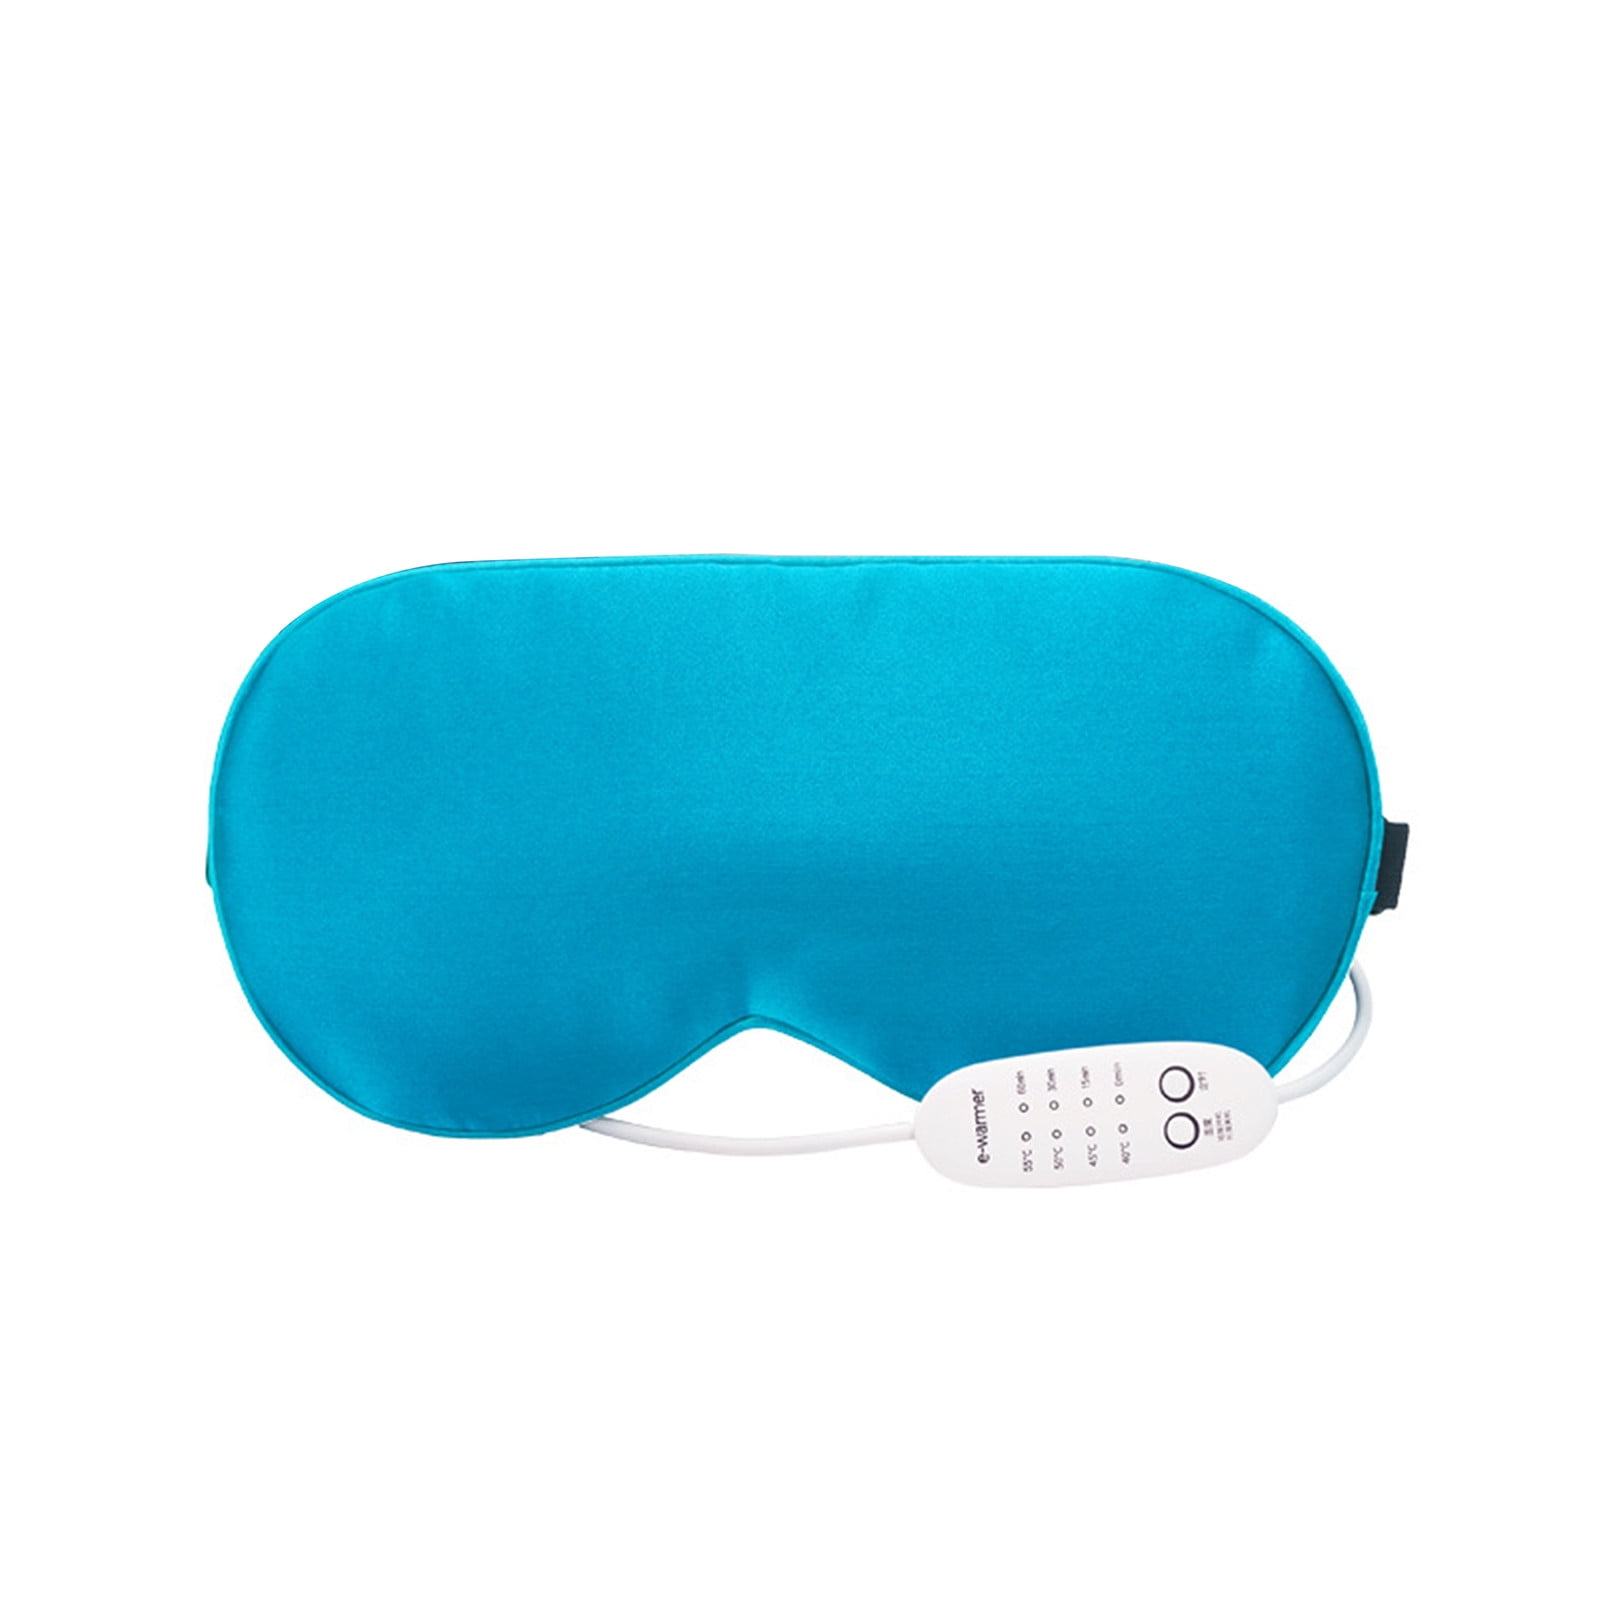 CALA® Luxurious, Soft, Fluffy Sleeping mask. Anti-Aging Skin Care, Ultra  Soft & Light, Comfortable for All Positions nap.